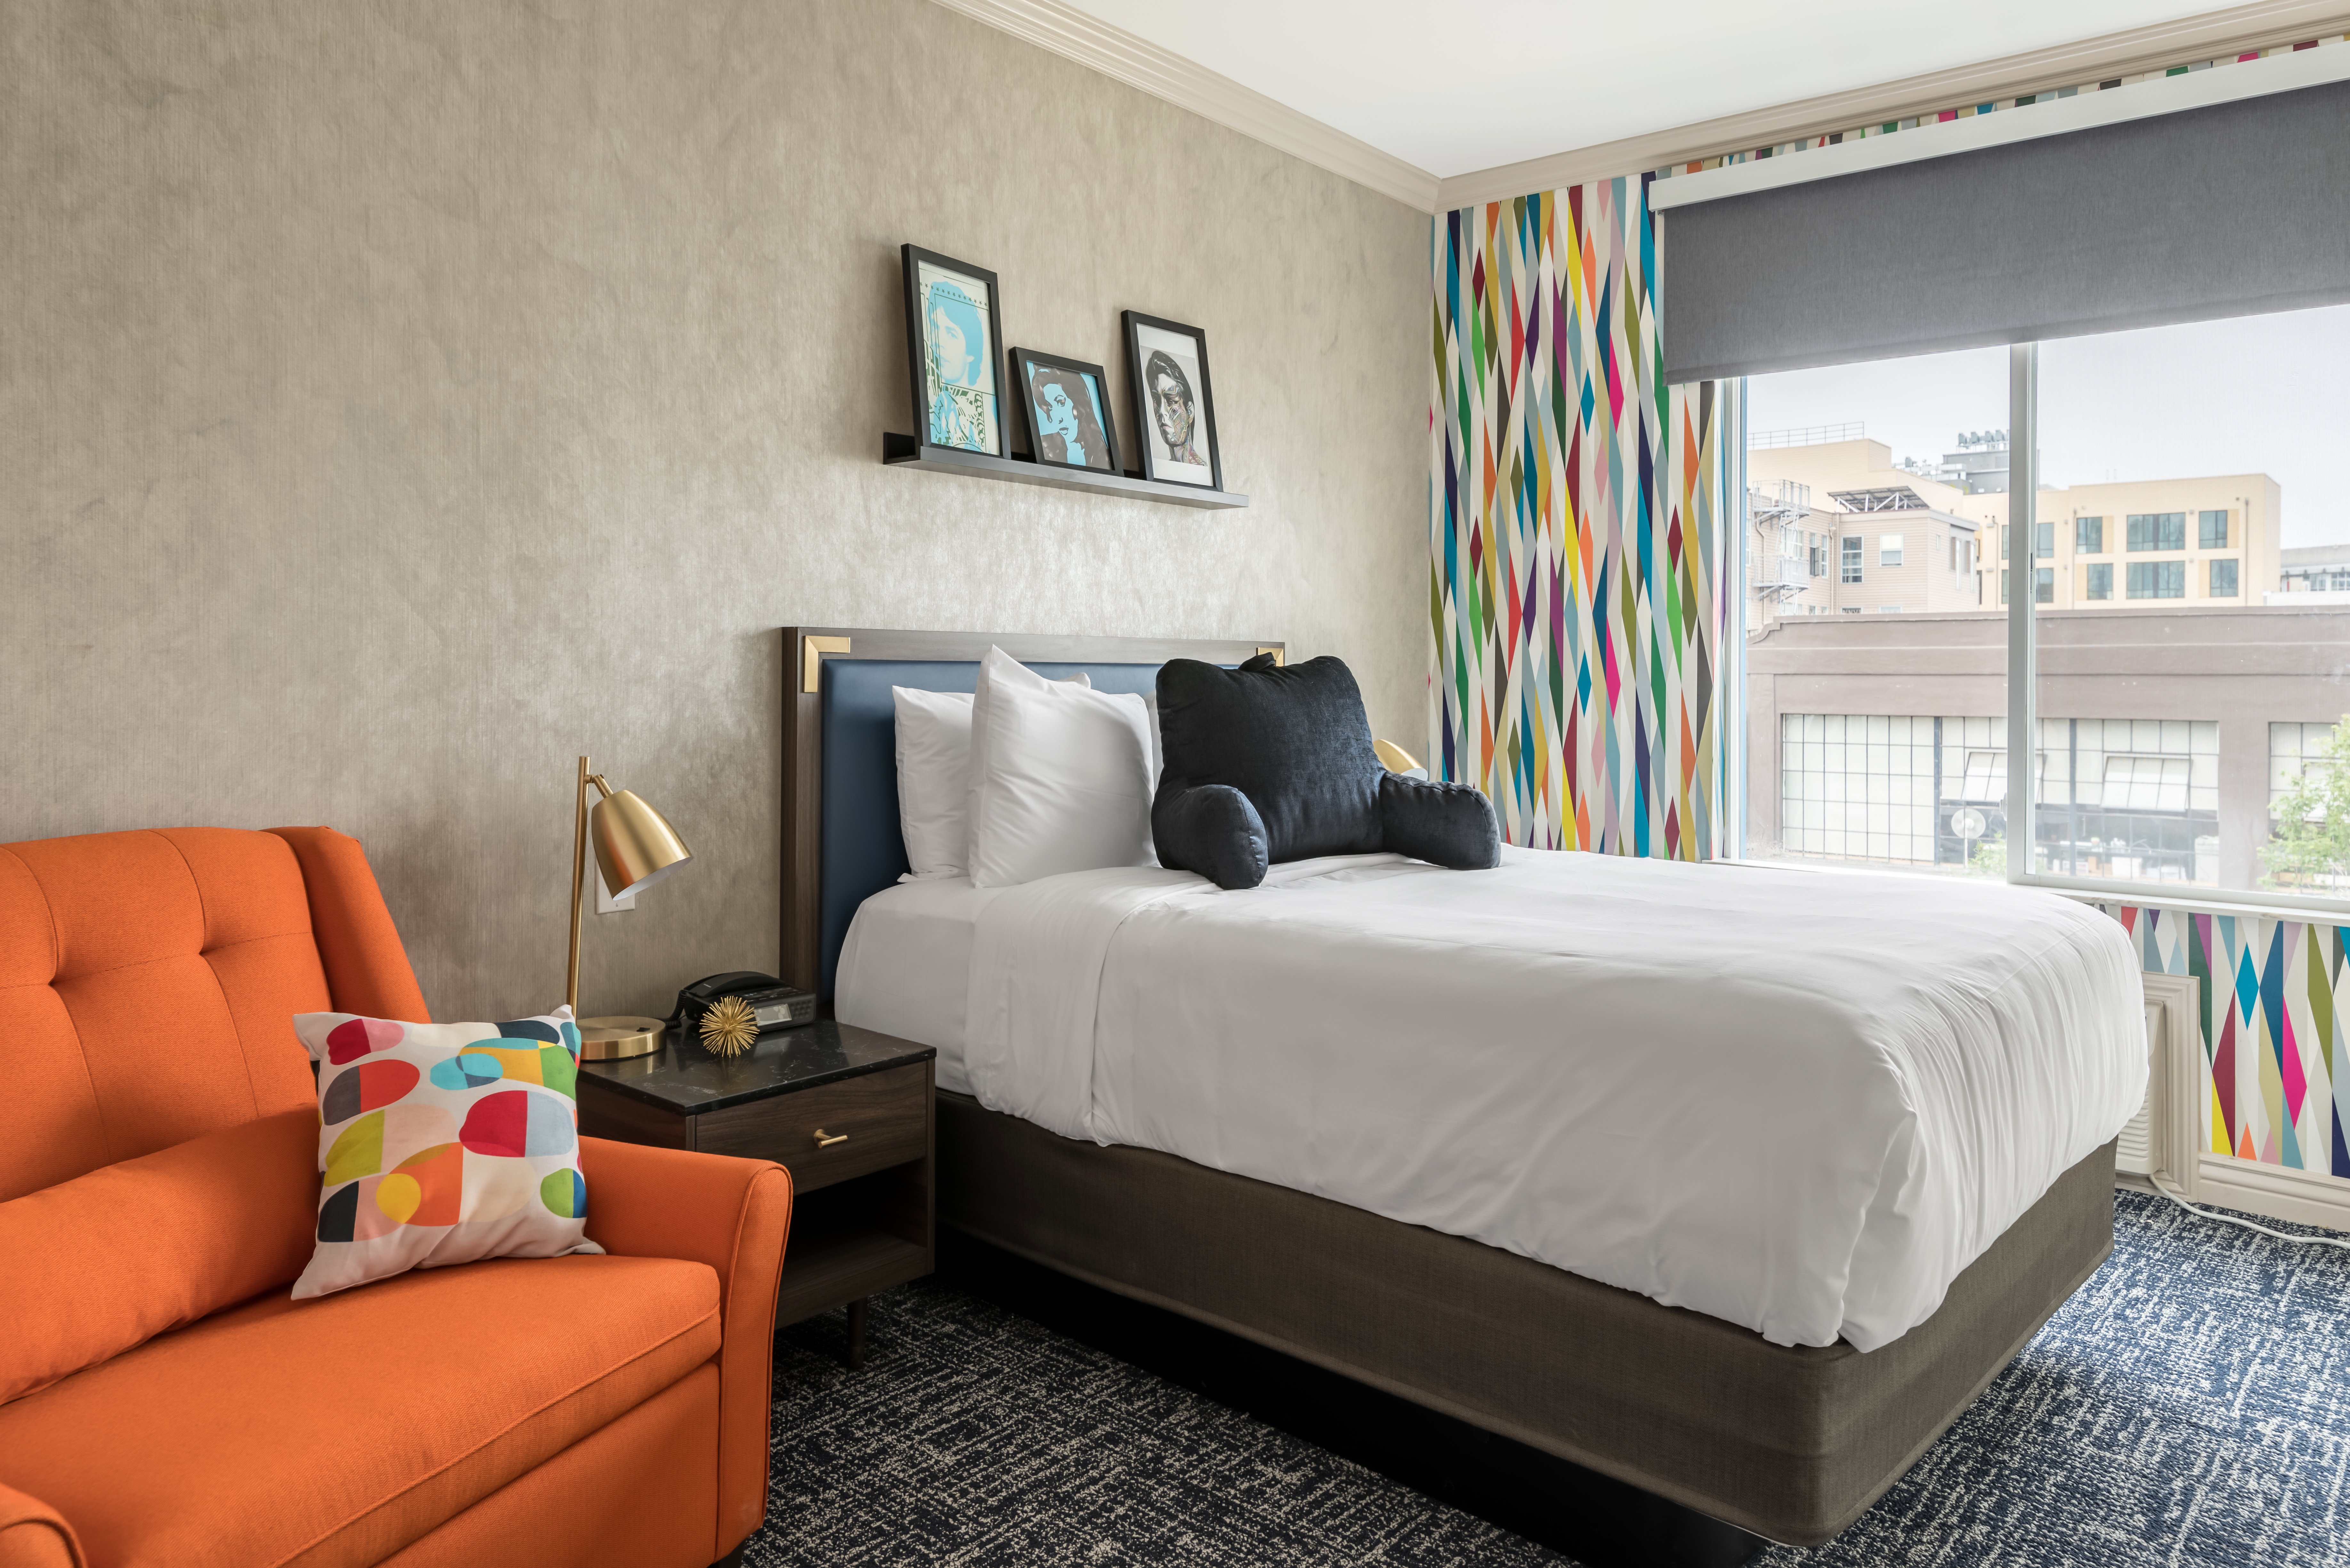 The 34-room hotel is the first Signature property to open singe the brands refresh was introduced in 2017